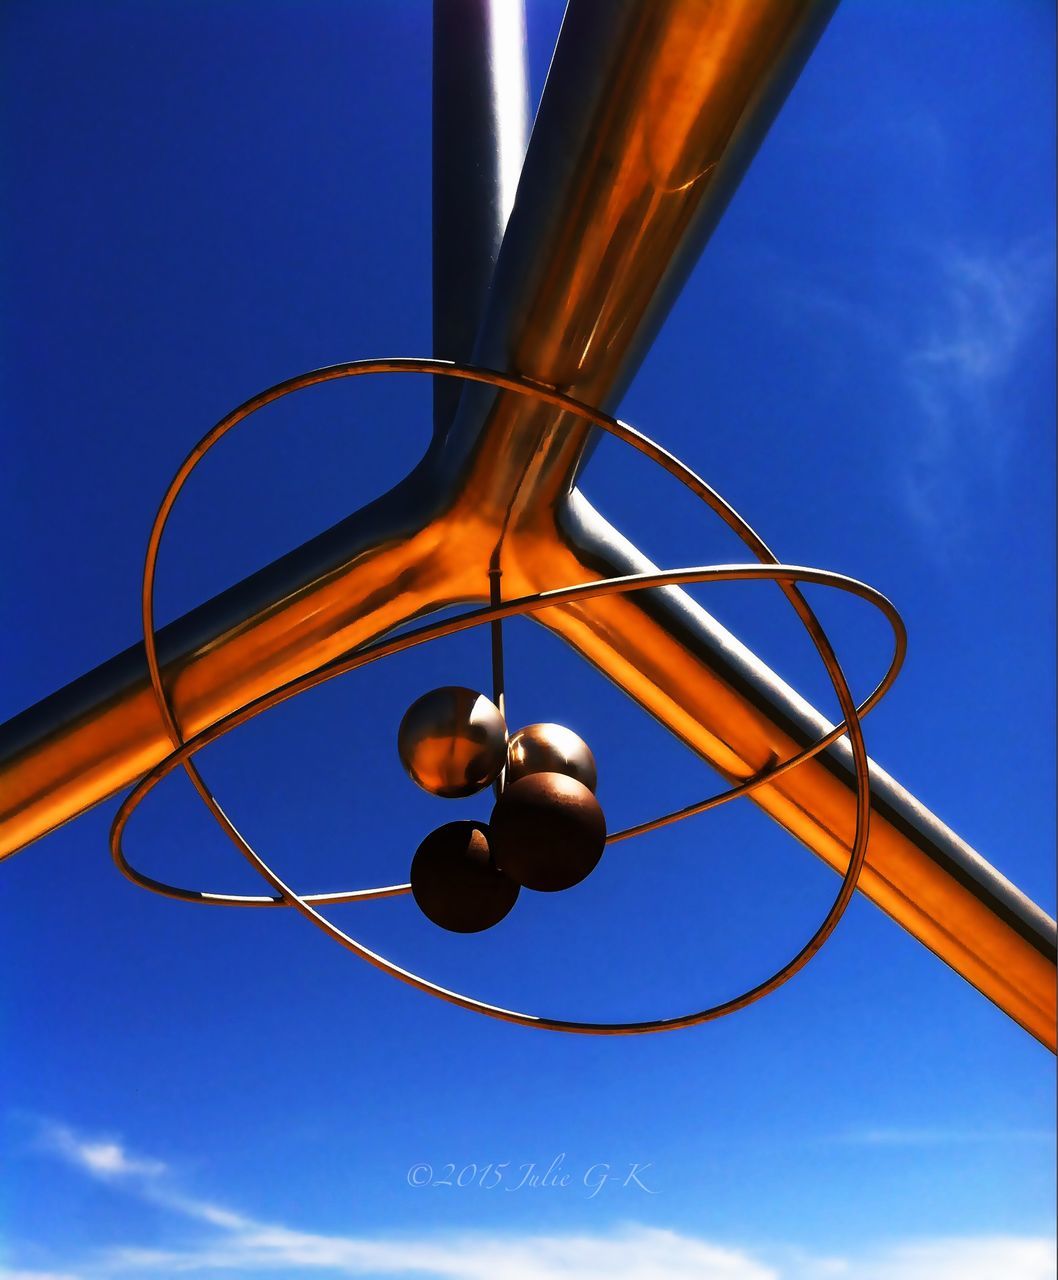 low angle view, sky, blue, lighting equipment, hanging, metal, close-up, electricity, street light, no people, light bulb, circle, outdoors, sunlight, metallic, sphere, electric light, day, part of, cloud